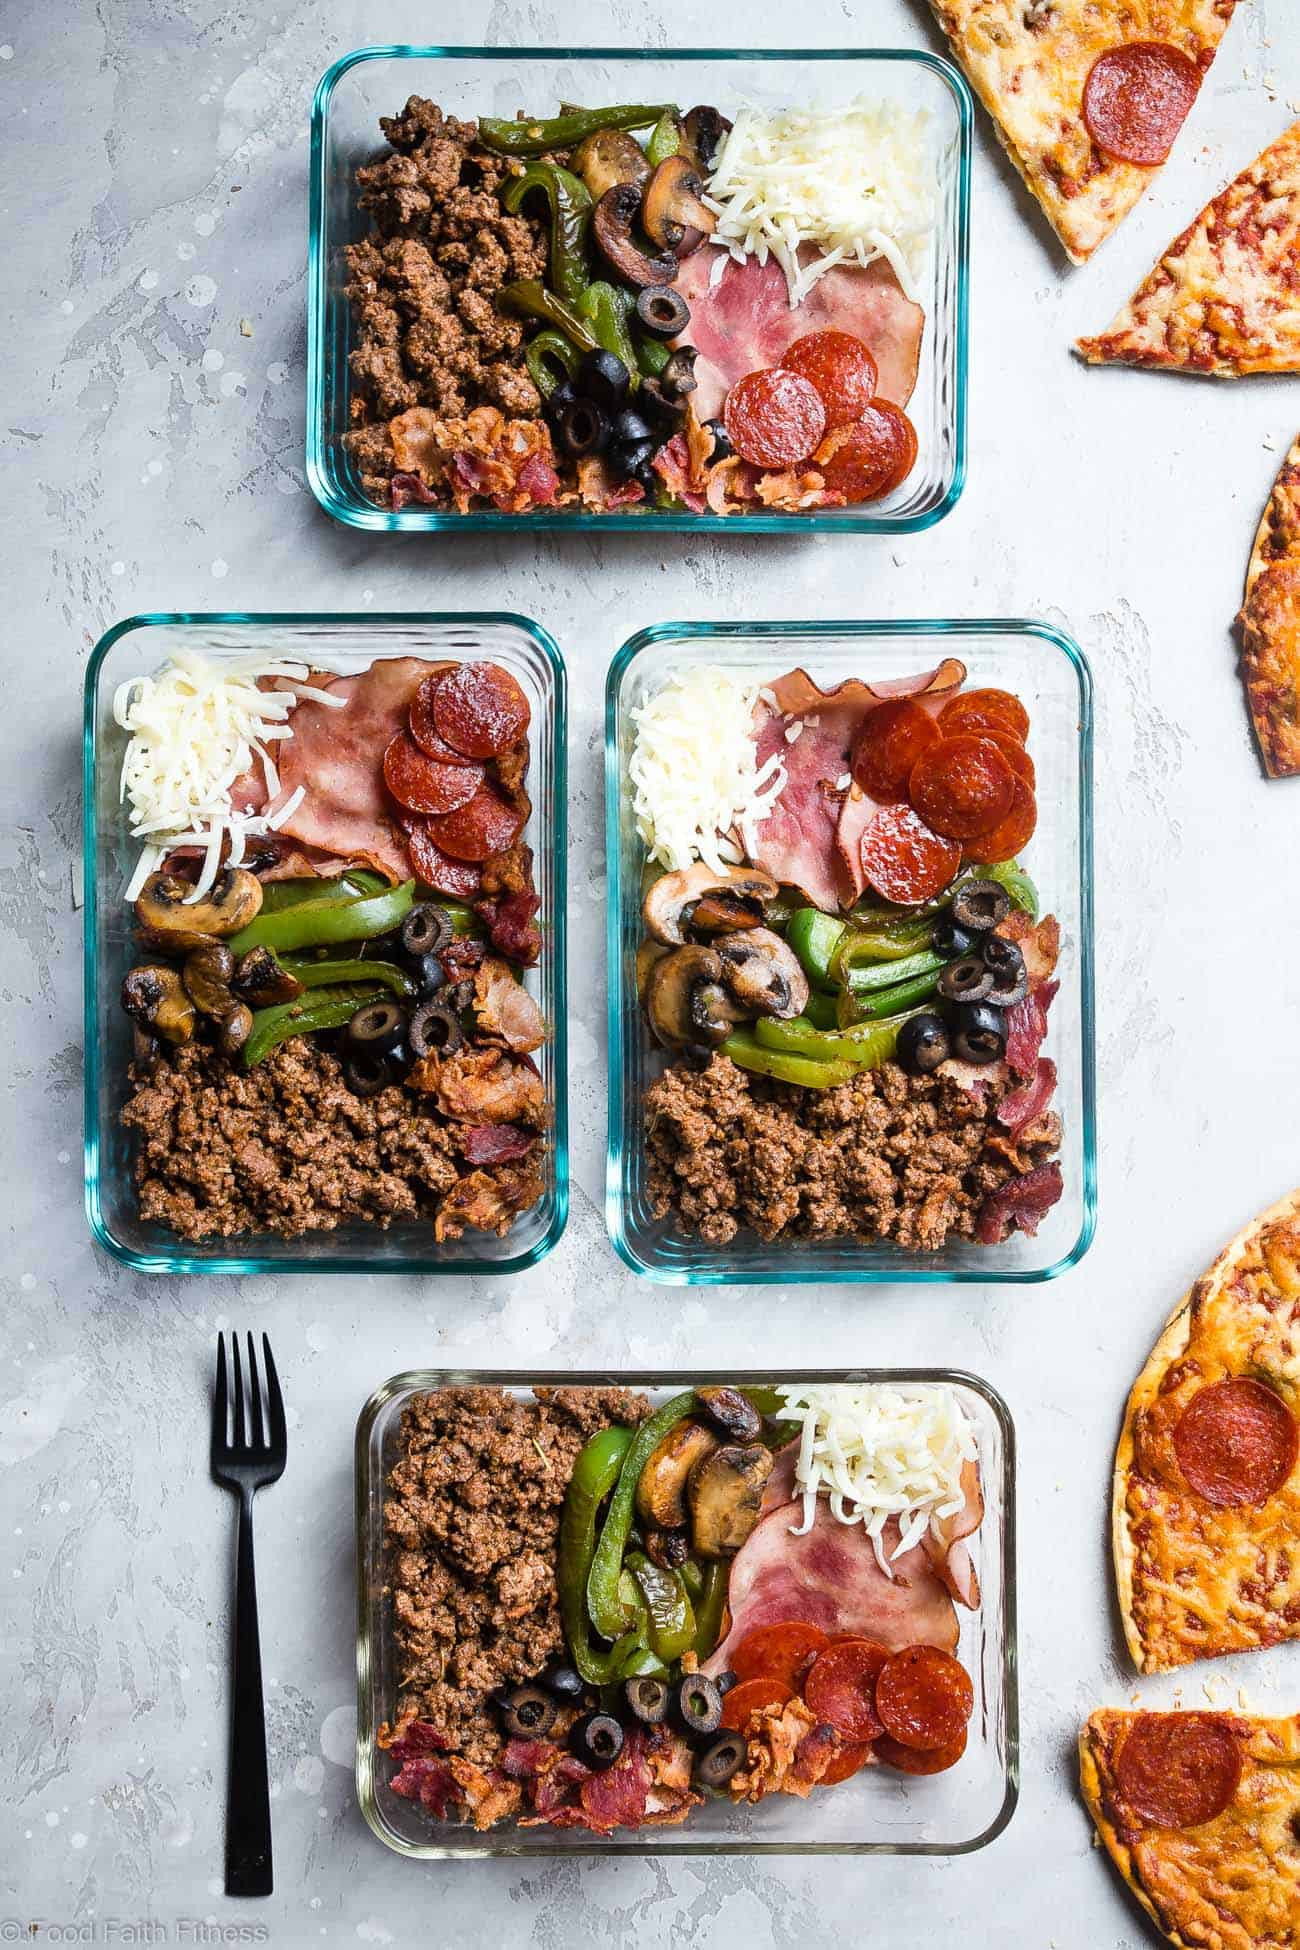 Dinner Recipes Healthy Low Carb Keto
 Keto Low Carb Pizza Meal Prep Bowls